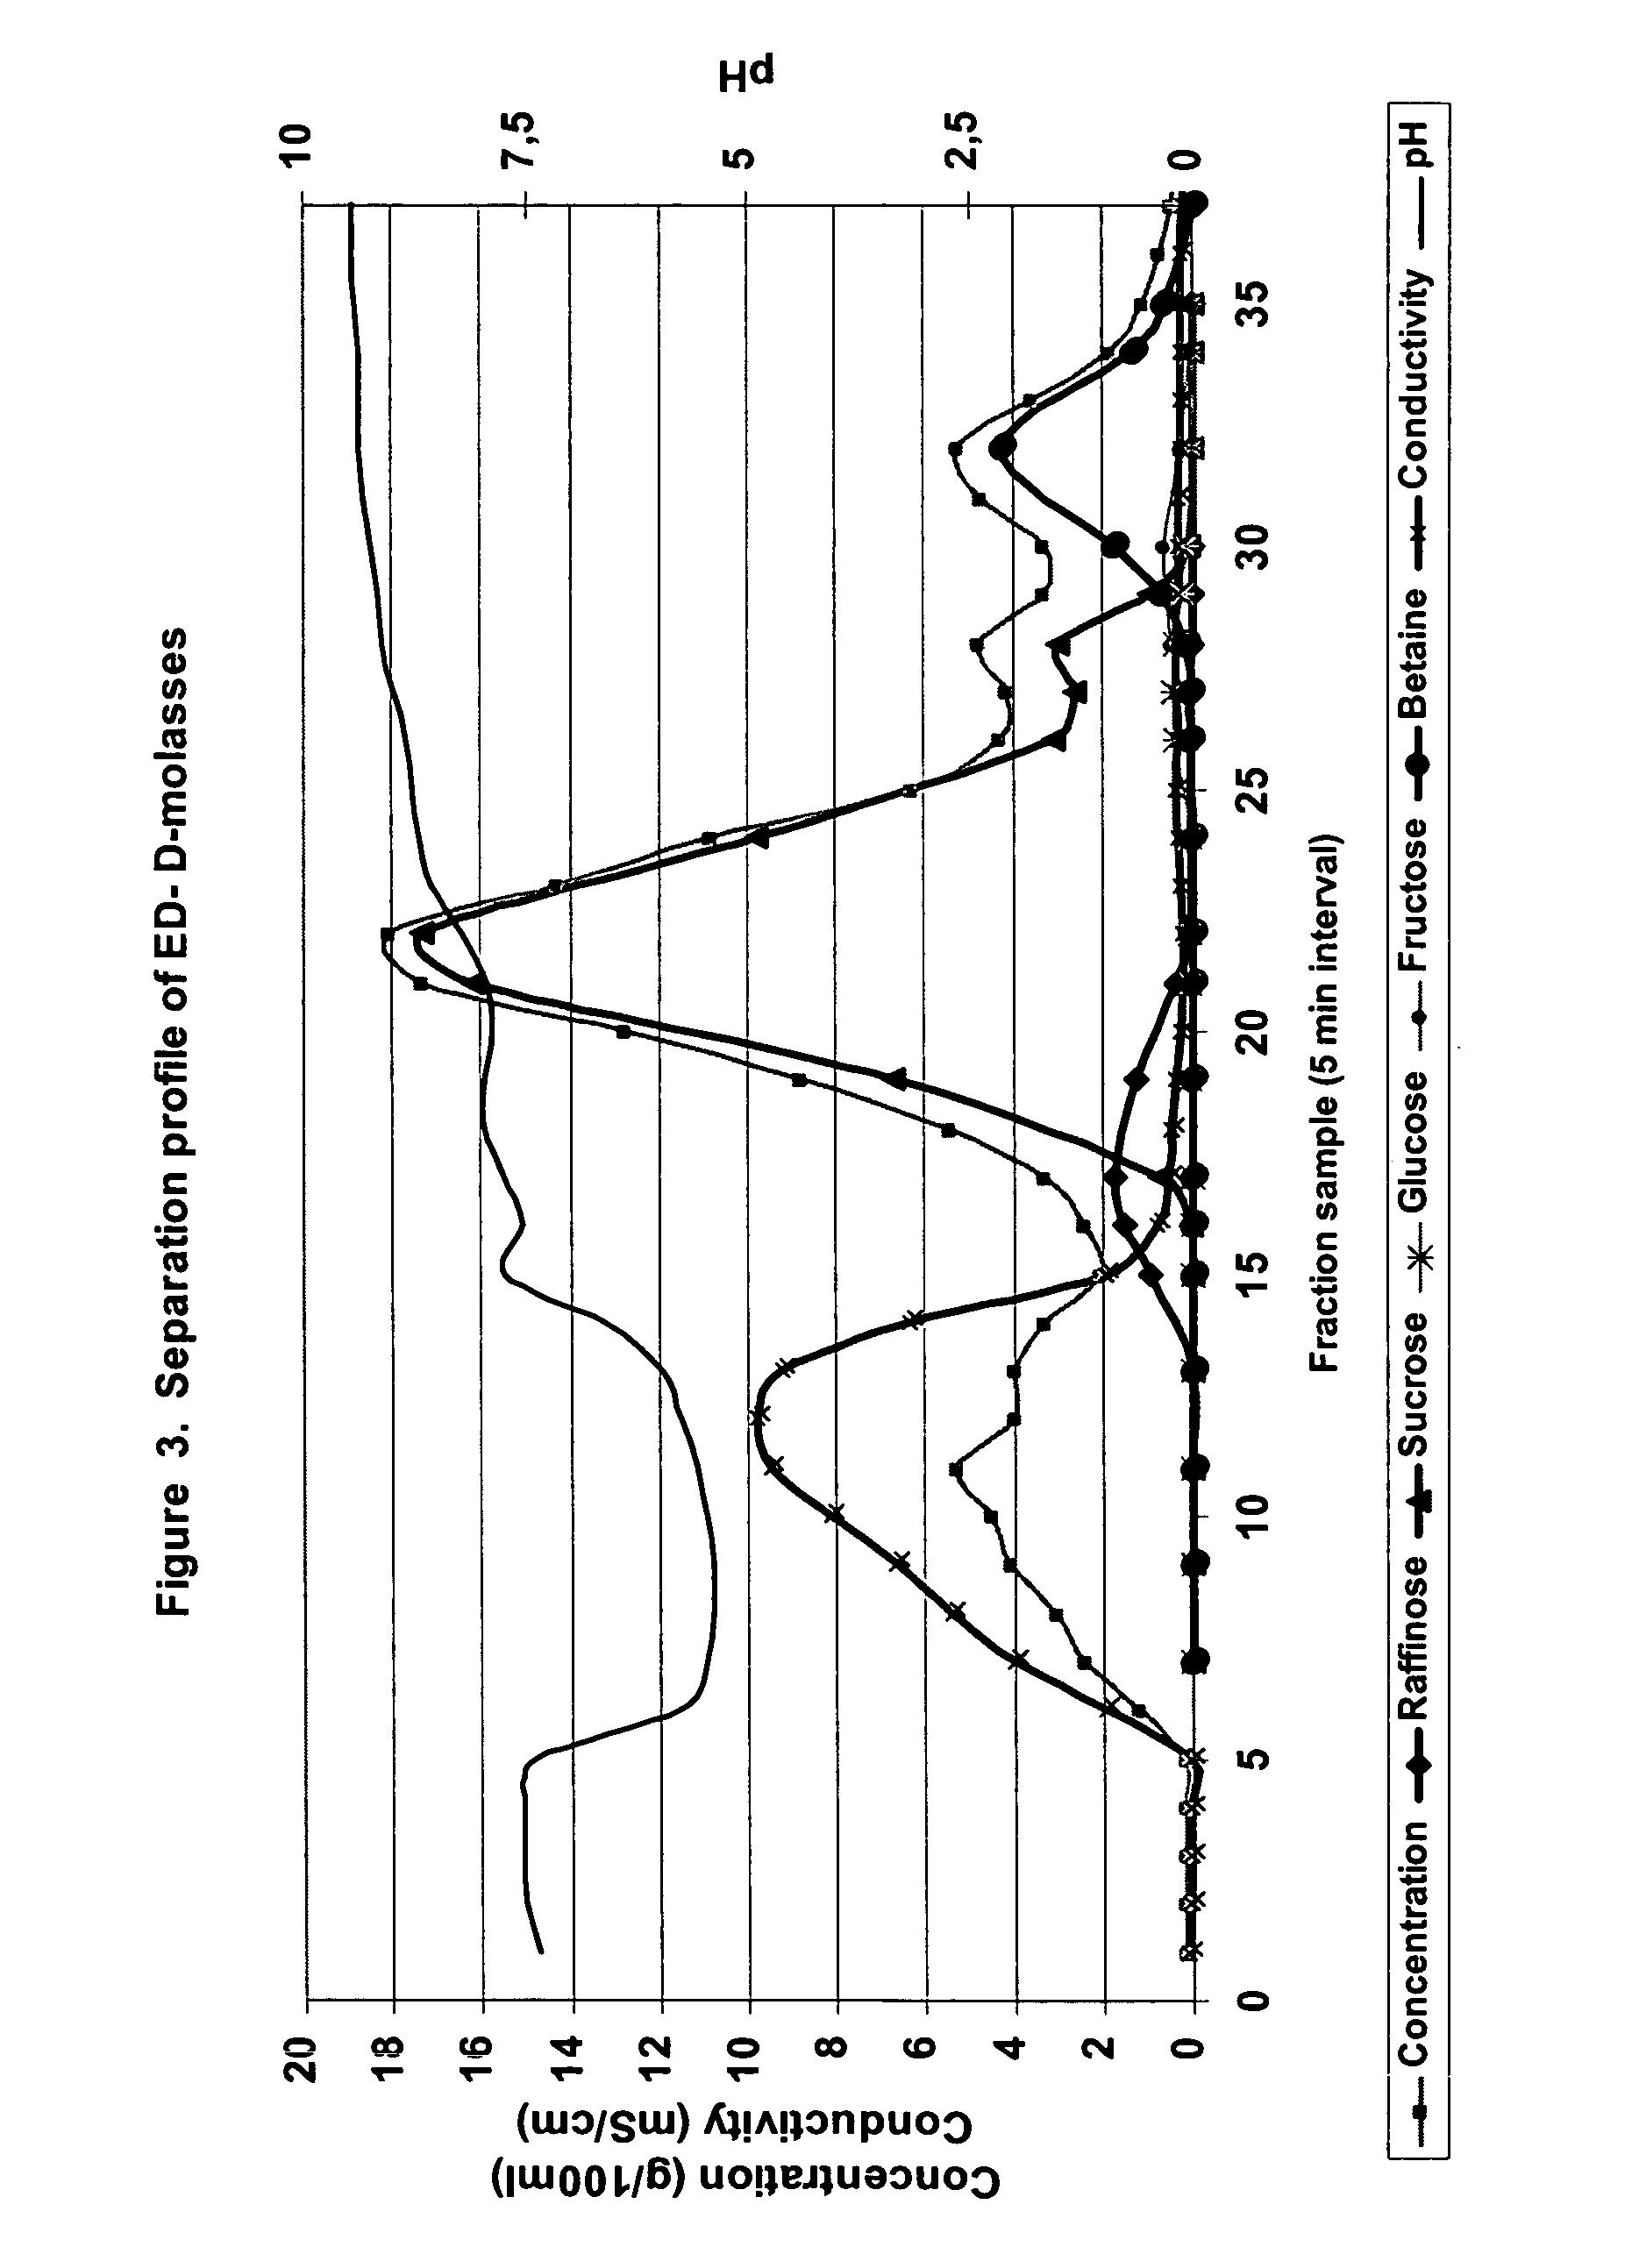 Process for the recovery of sucrose and/or non-sucrose components